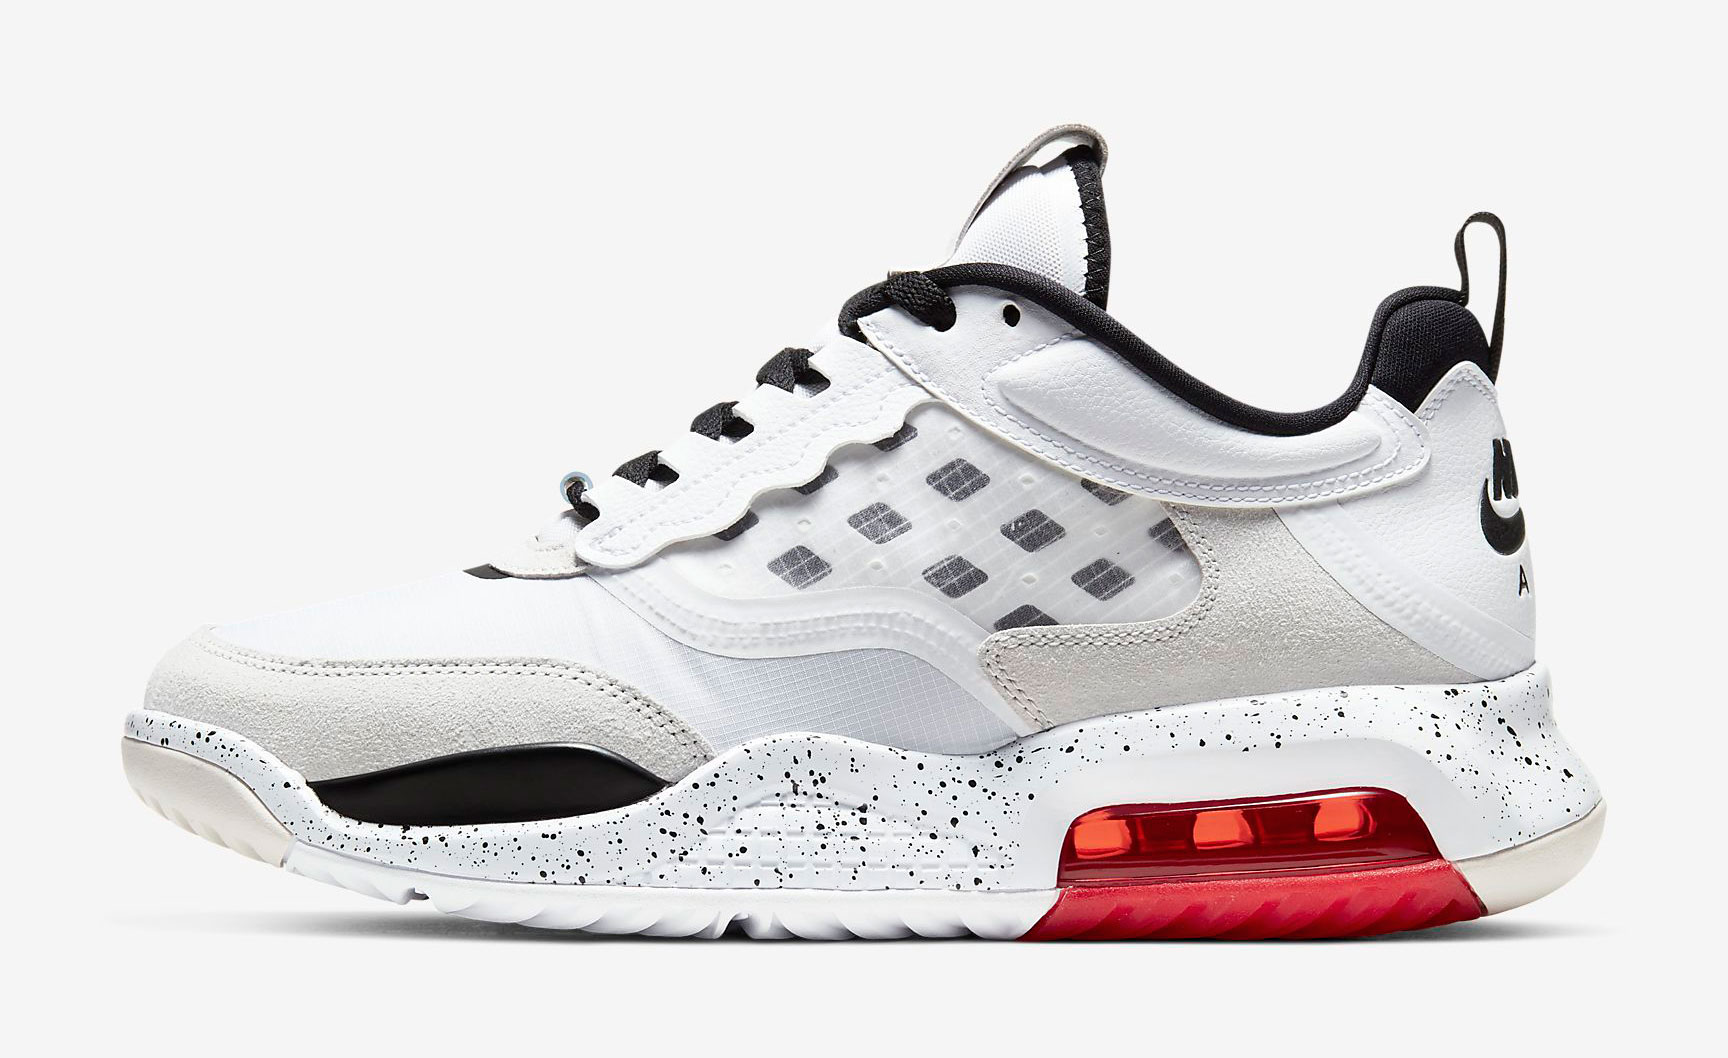 jordan-air-max-200-white-challenge-red-release-date